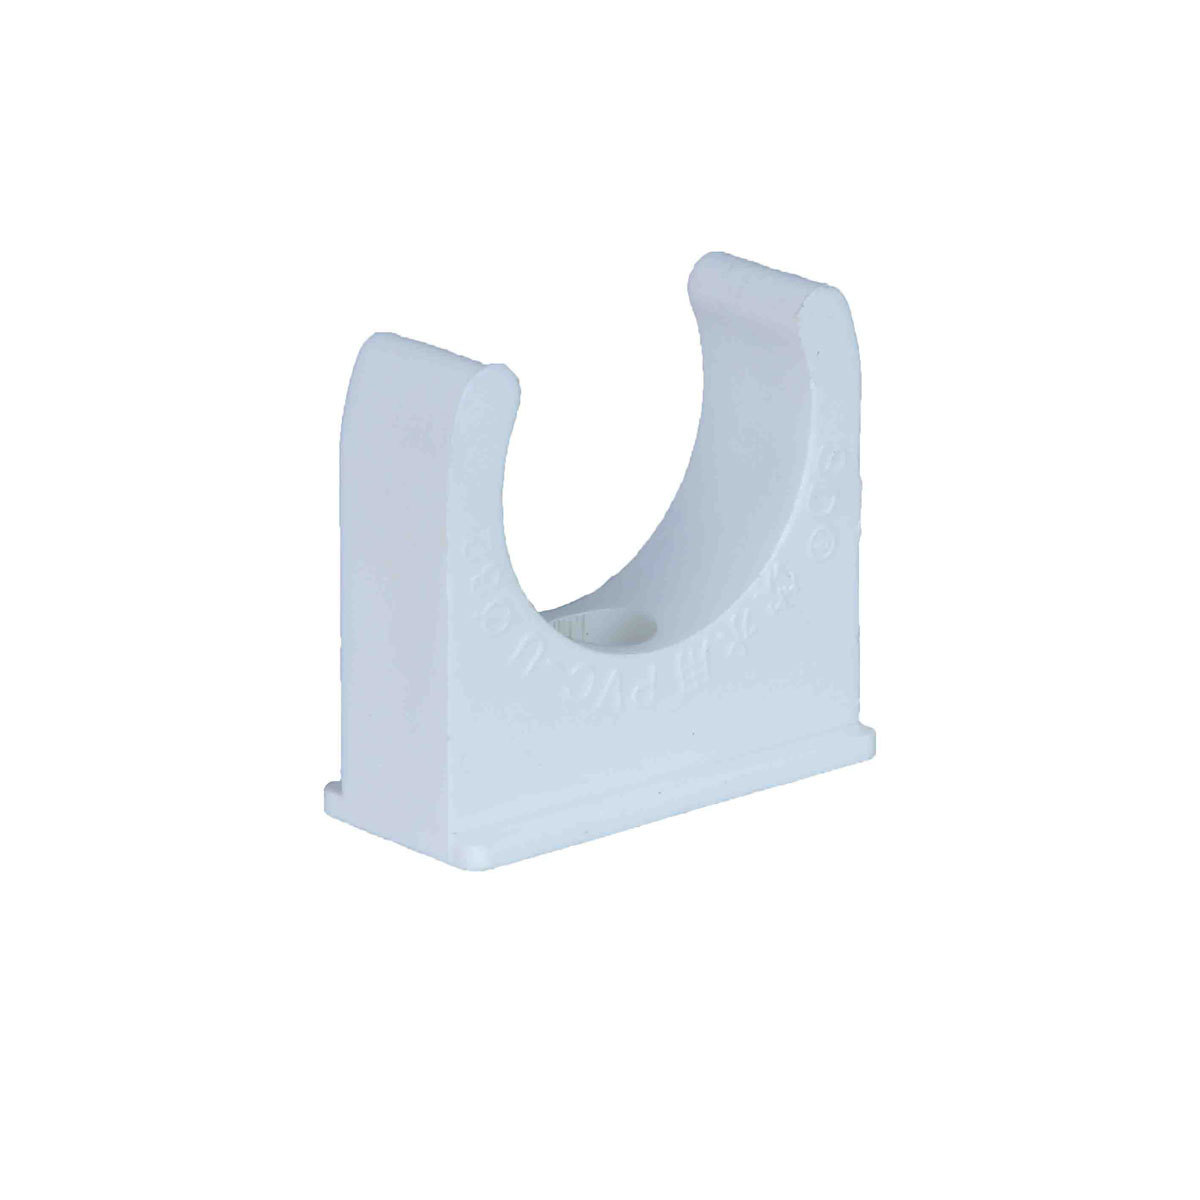 PVC water supply - u-shaped pipe clamp